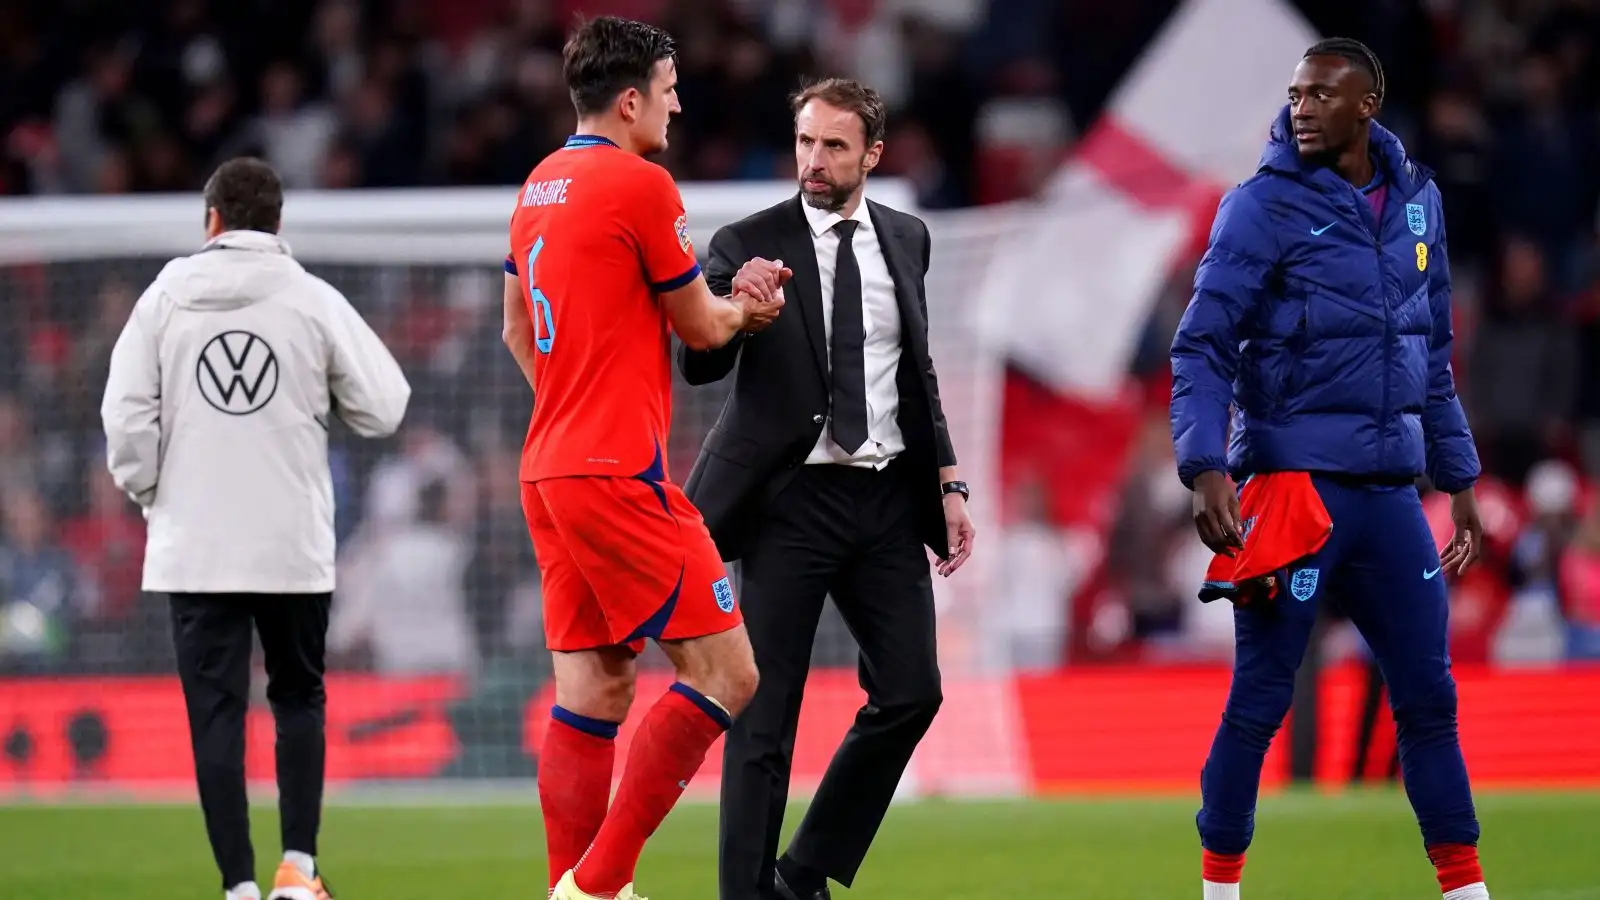 Harry Maguire shakes hands with Gareth Southgate